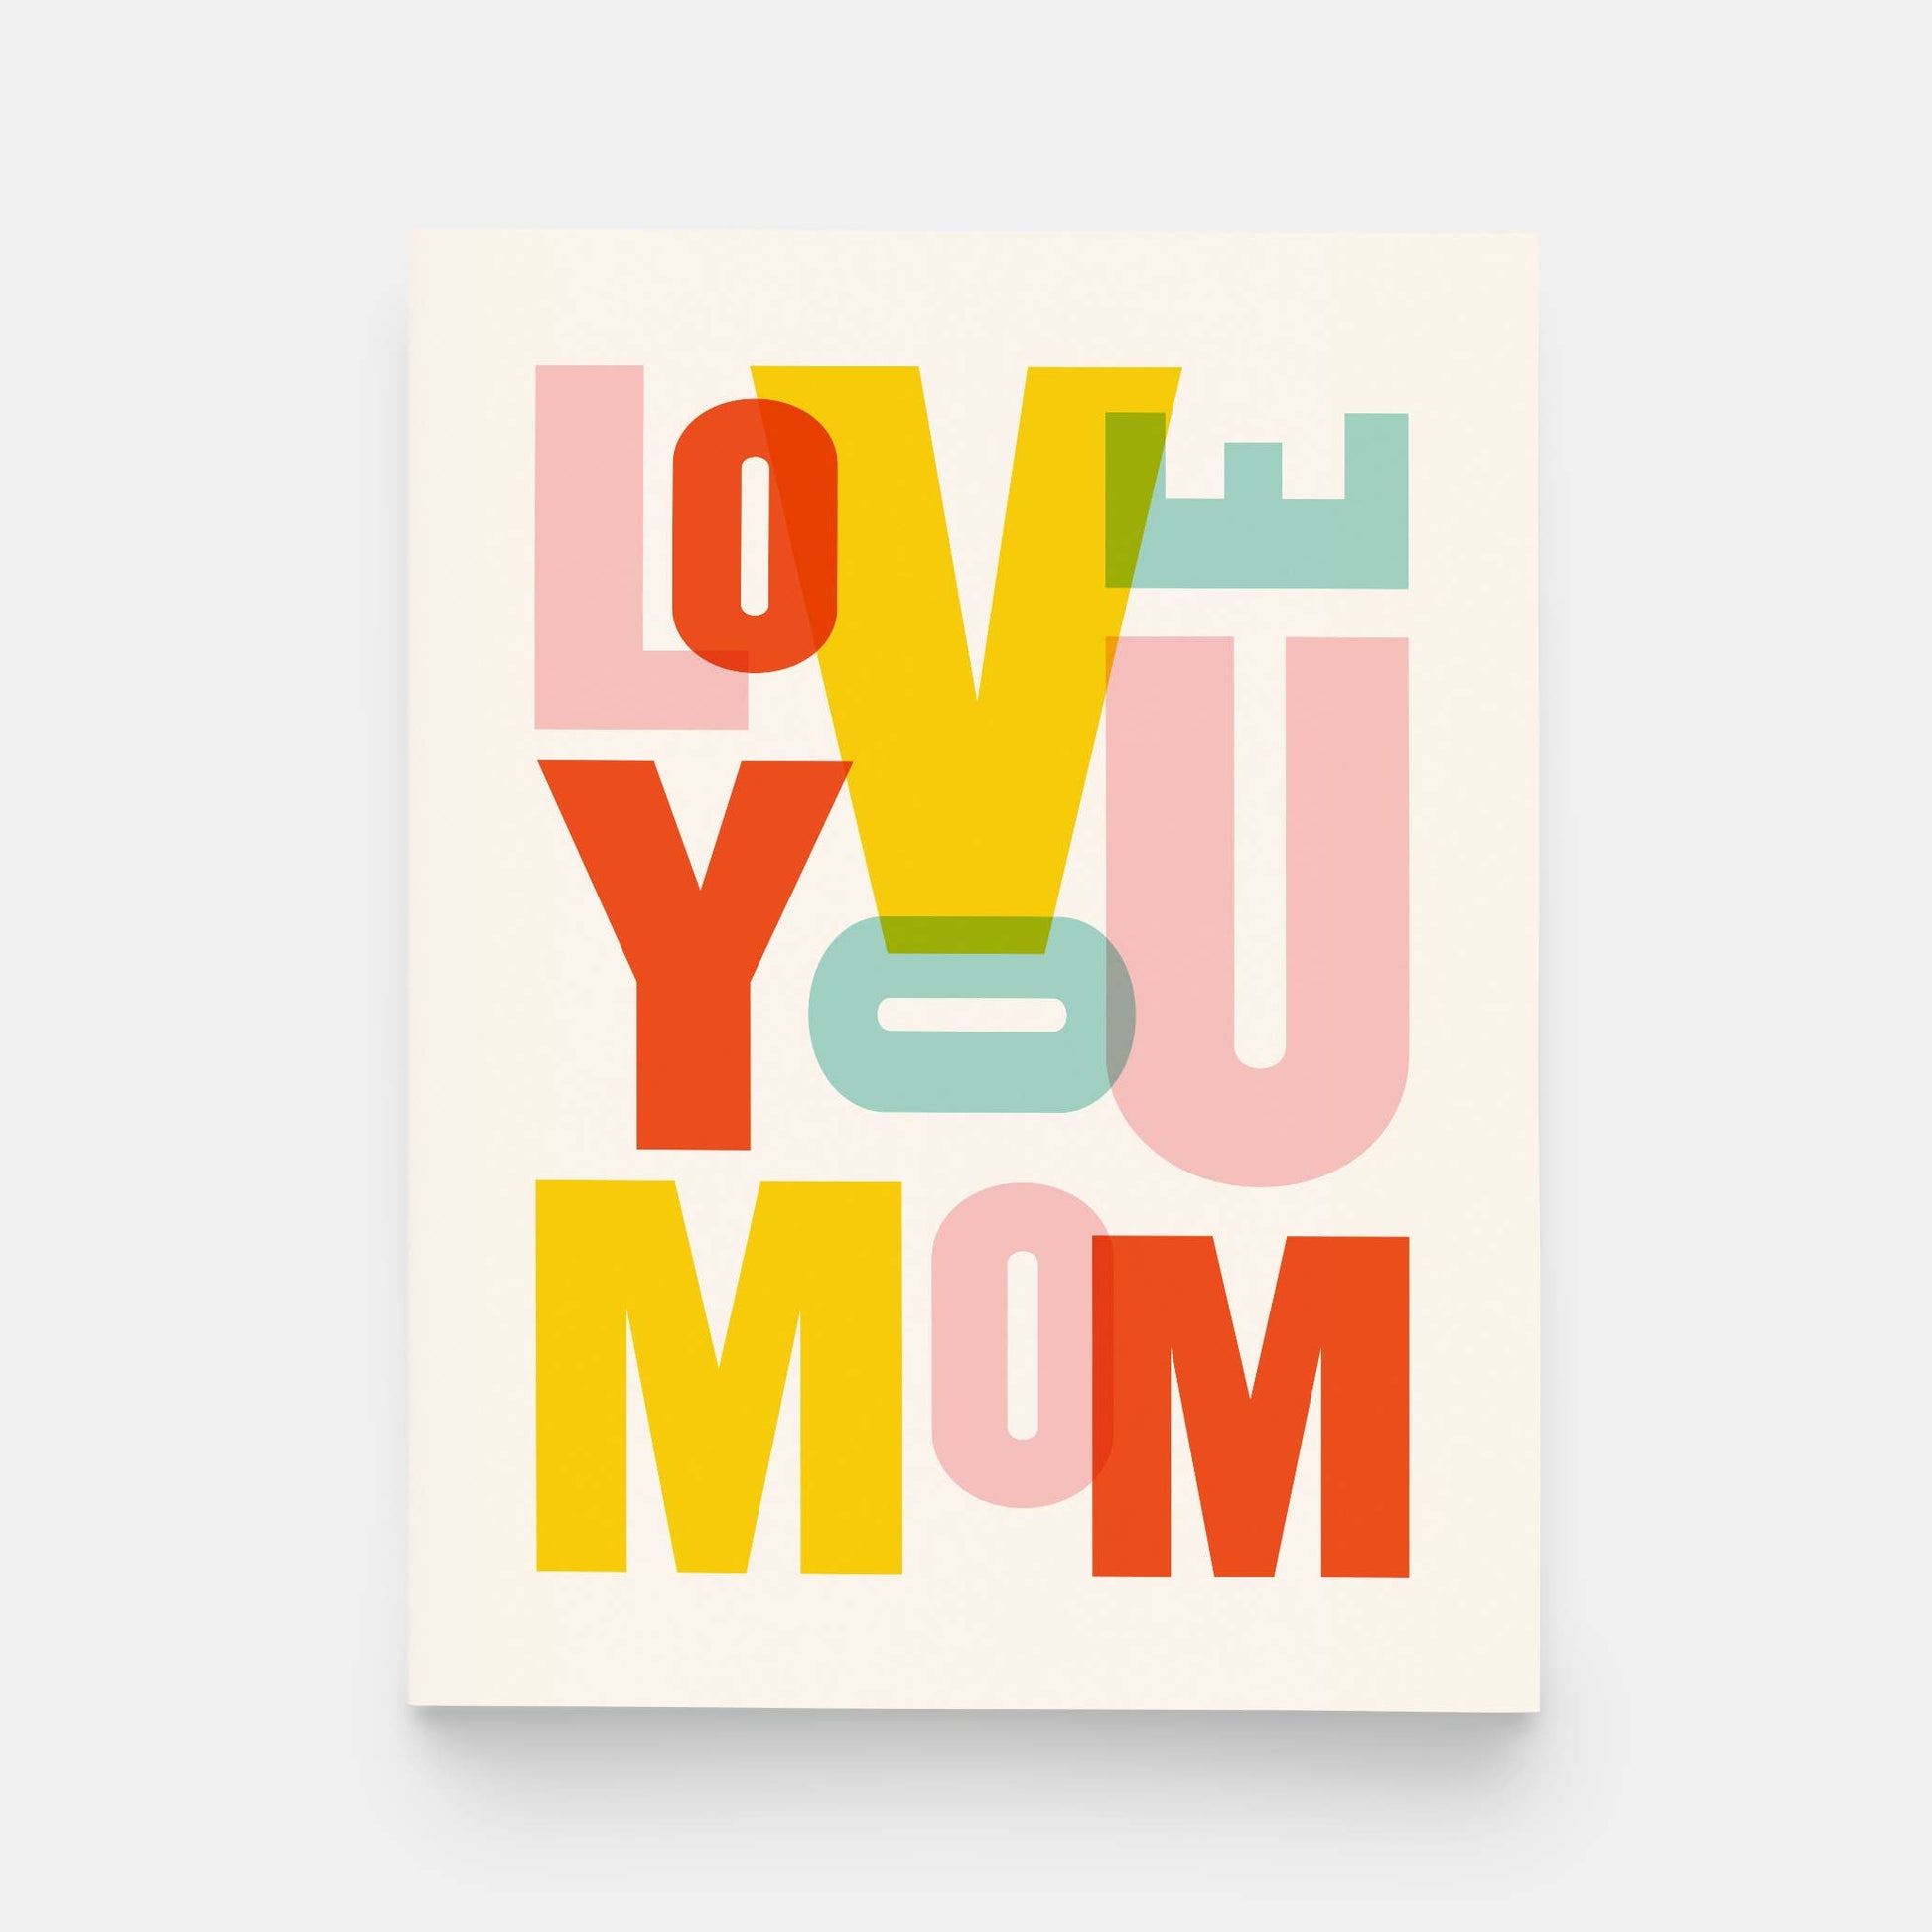 Love You Mom Greeting Card - The Crowd Went Wild